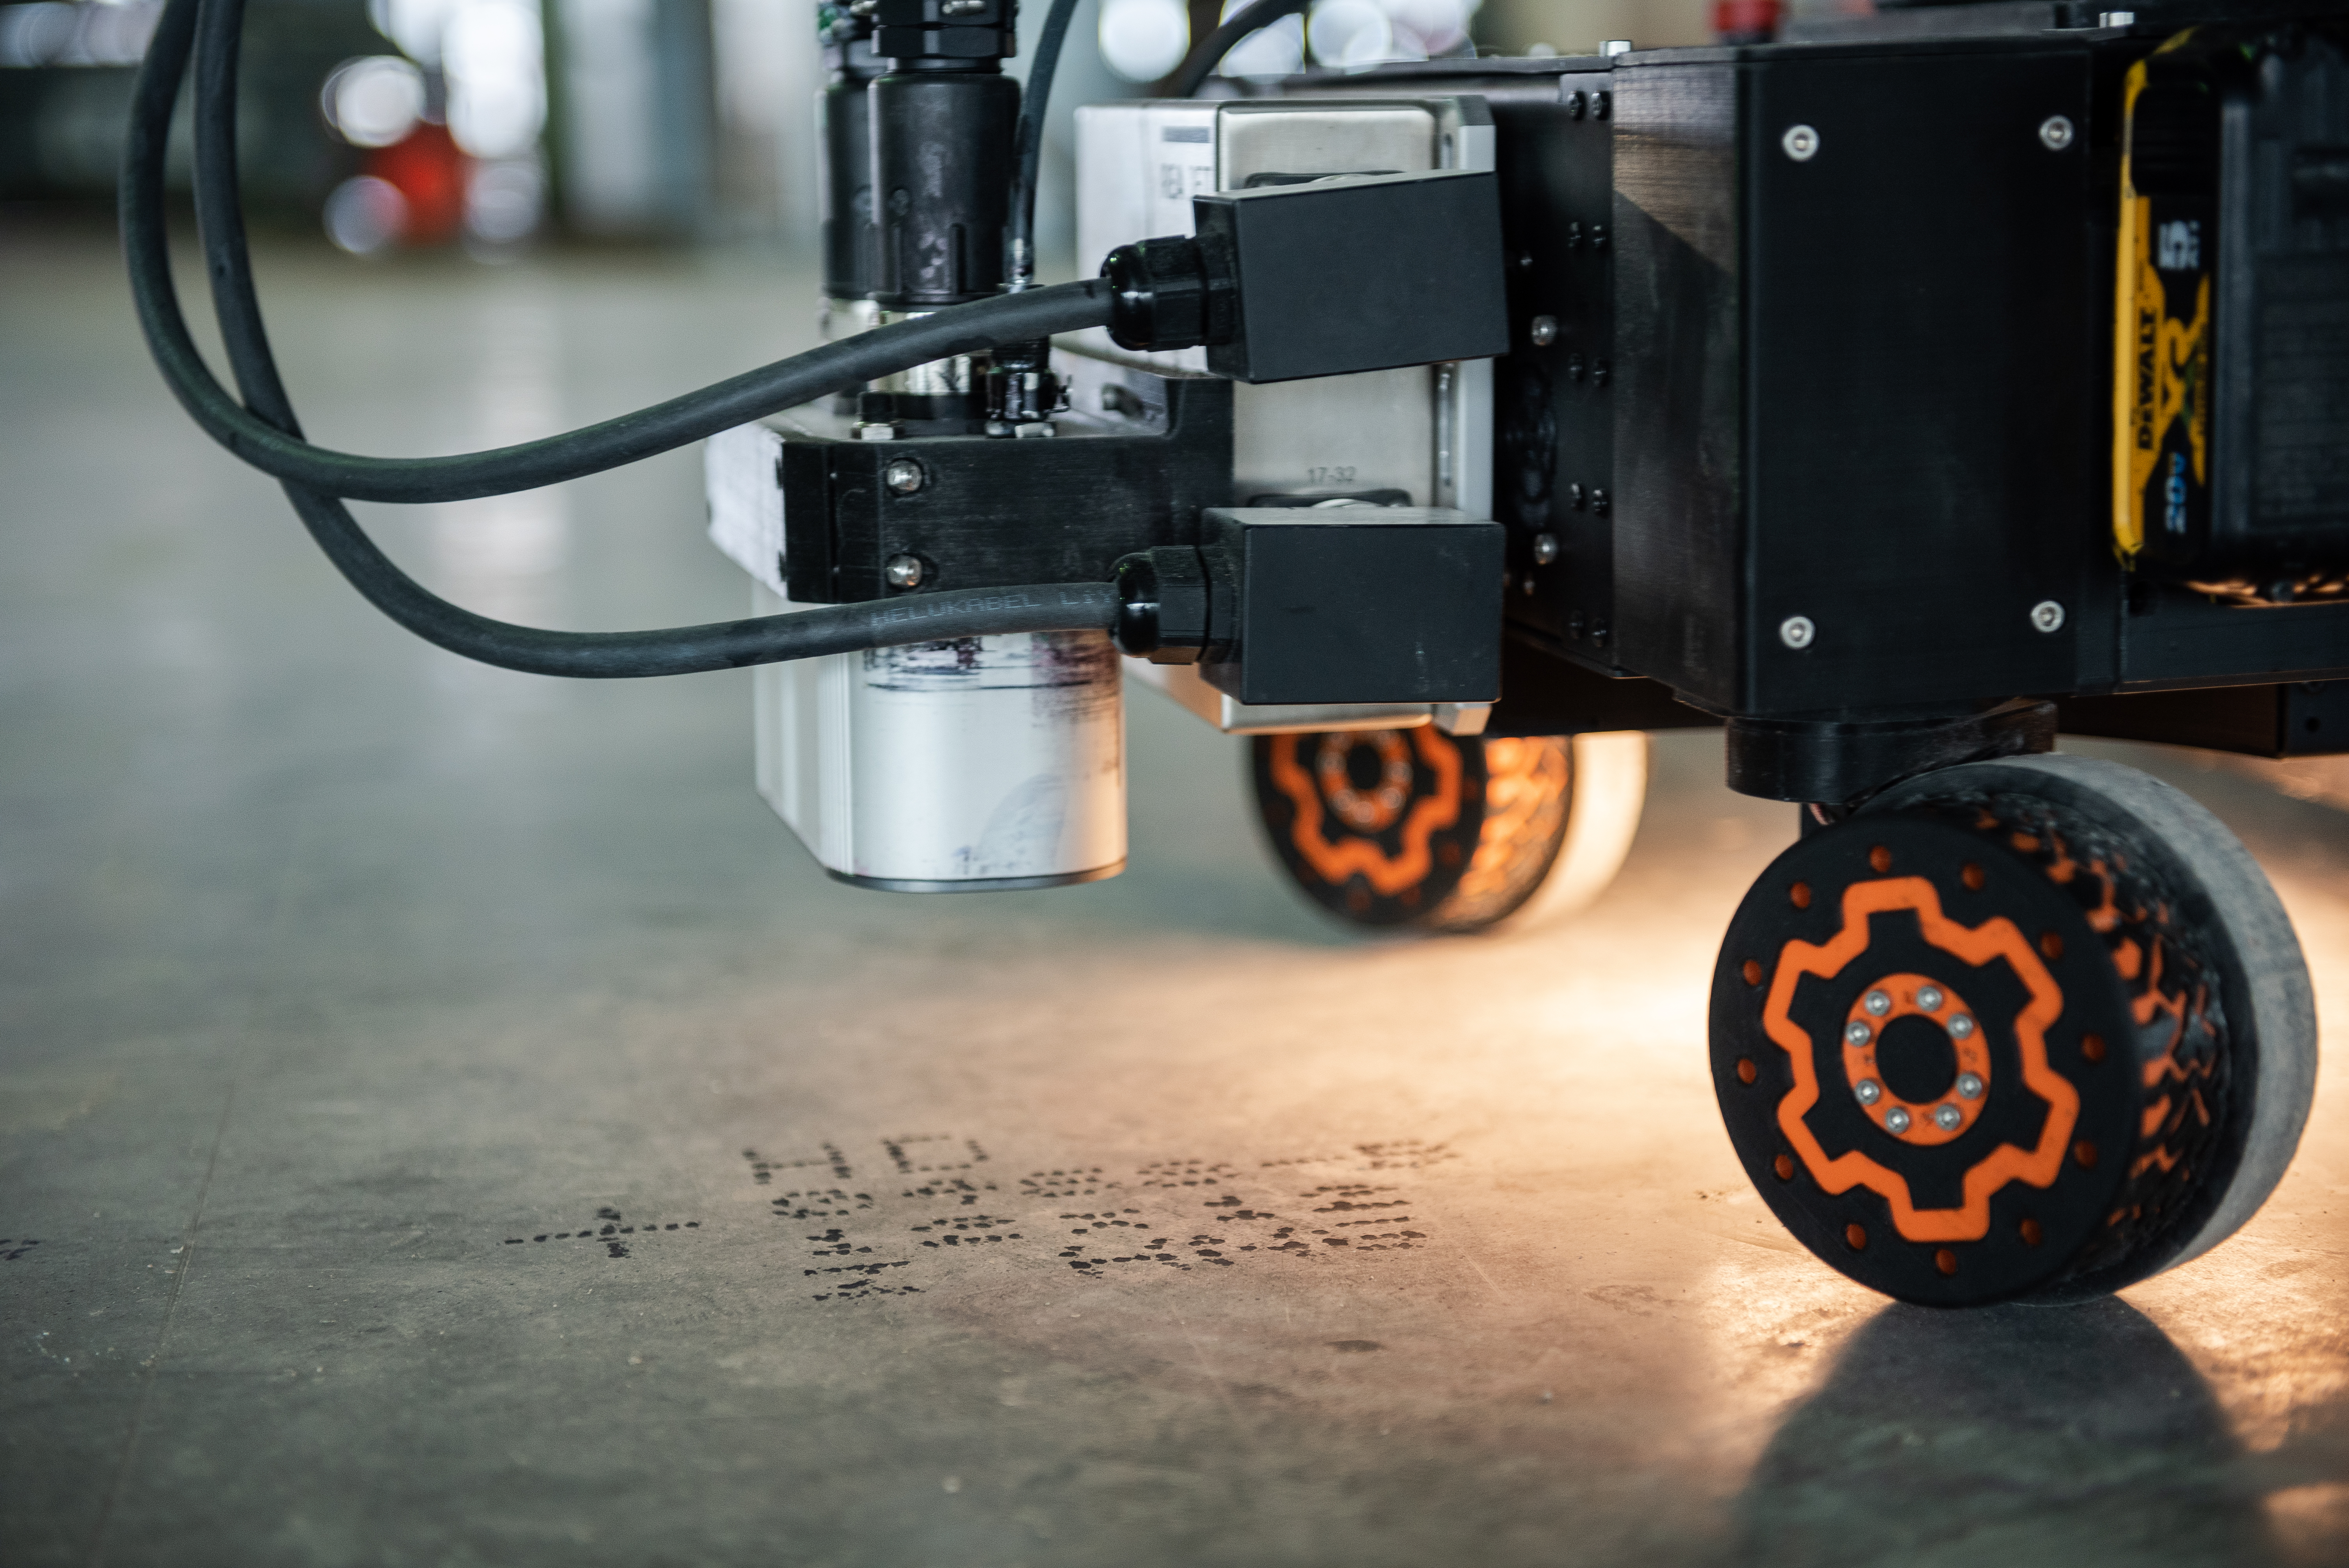 Rugged showcases its layout-printing construction robots